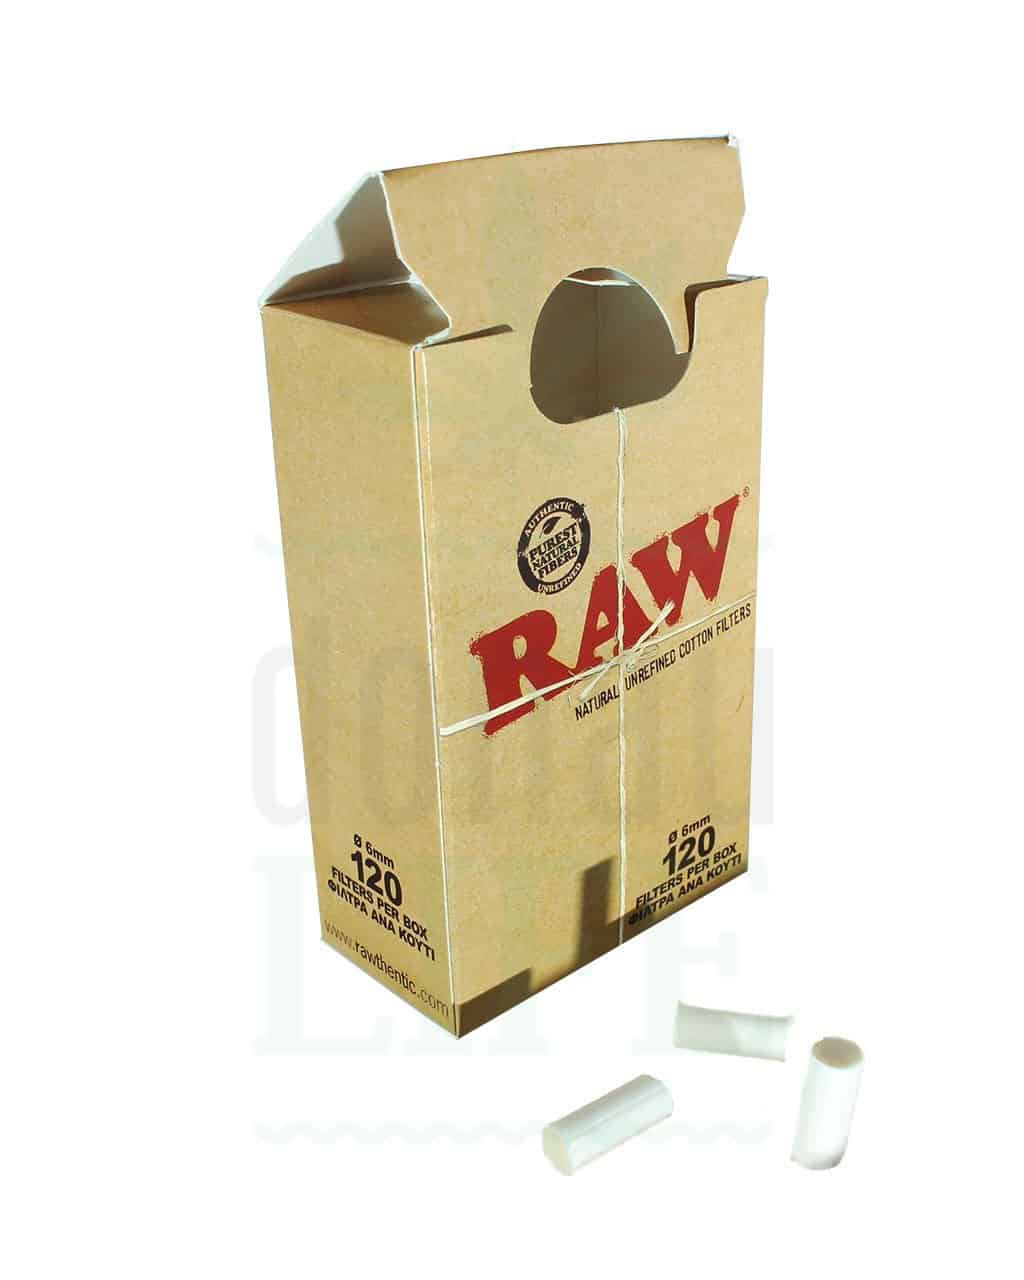 RAW Filter Tips Slim cigarette filters, 120 pieces